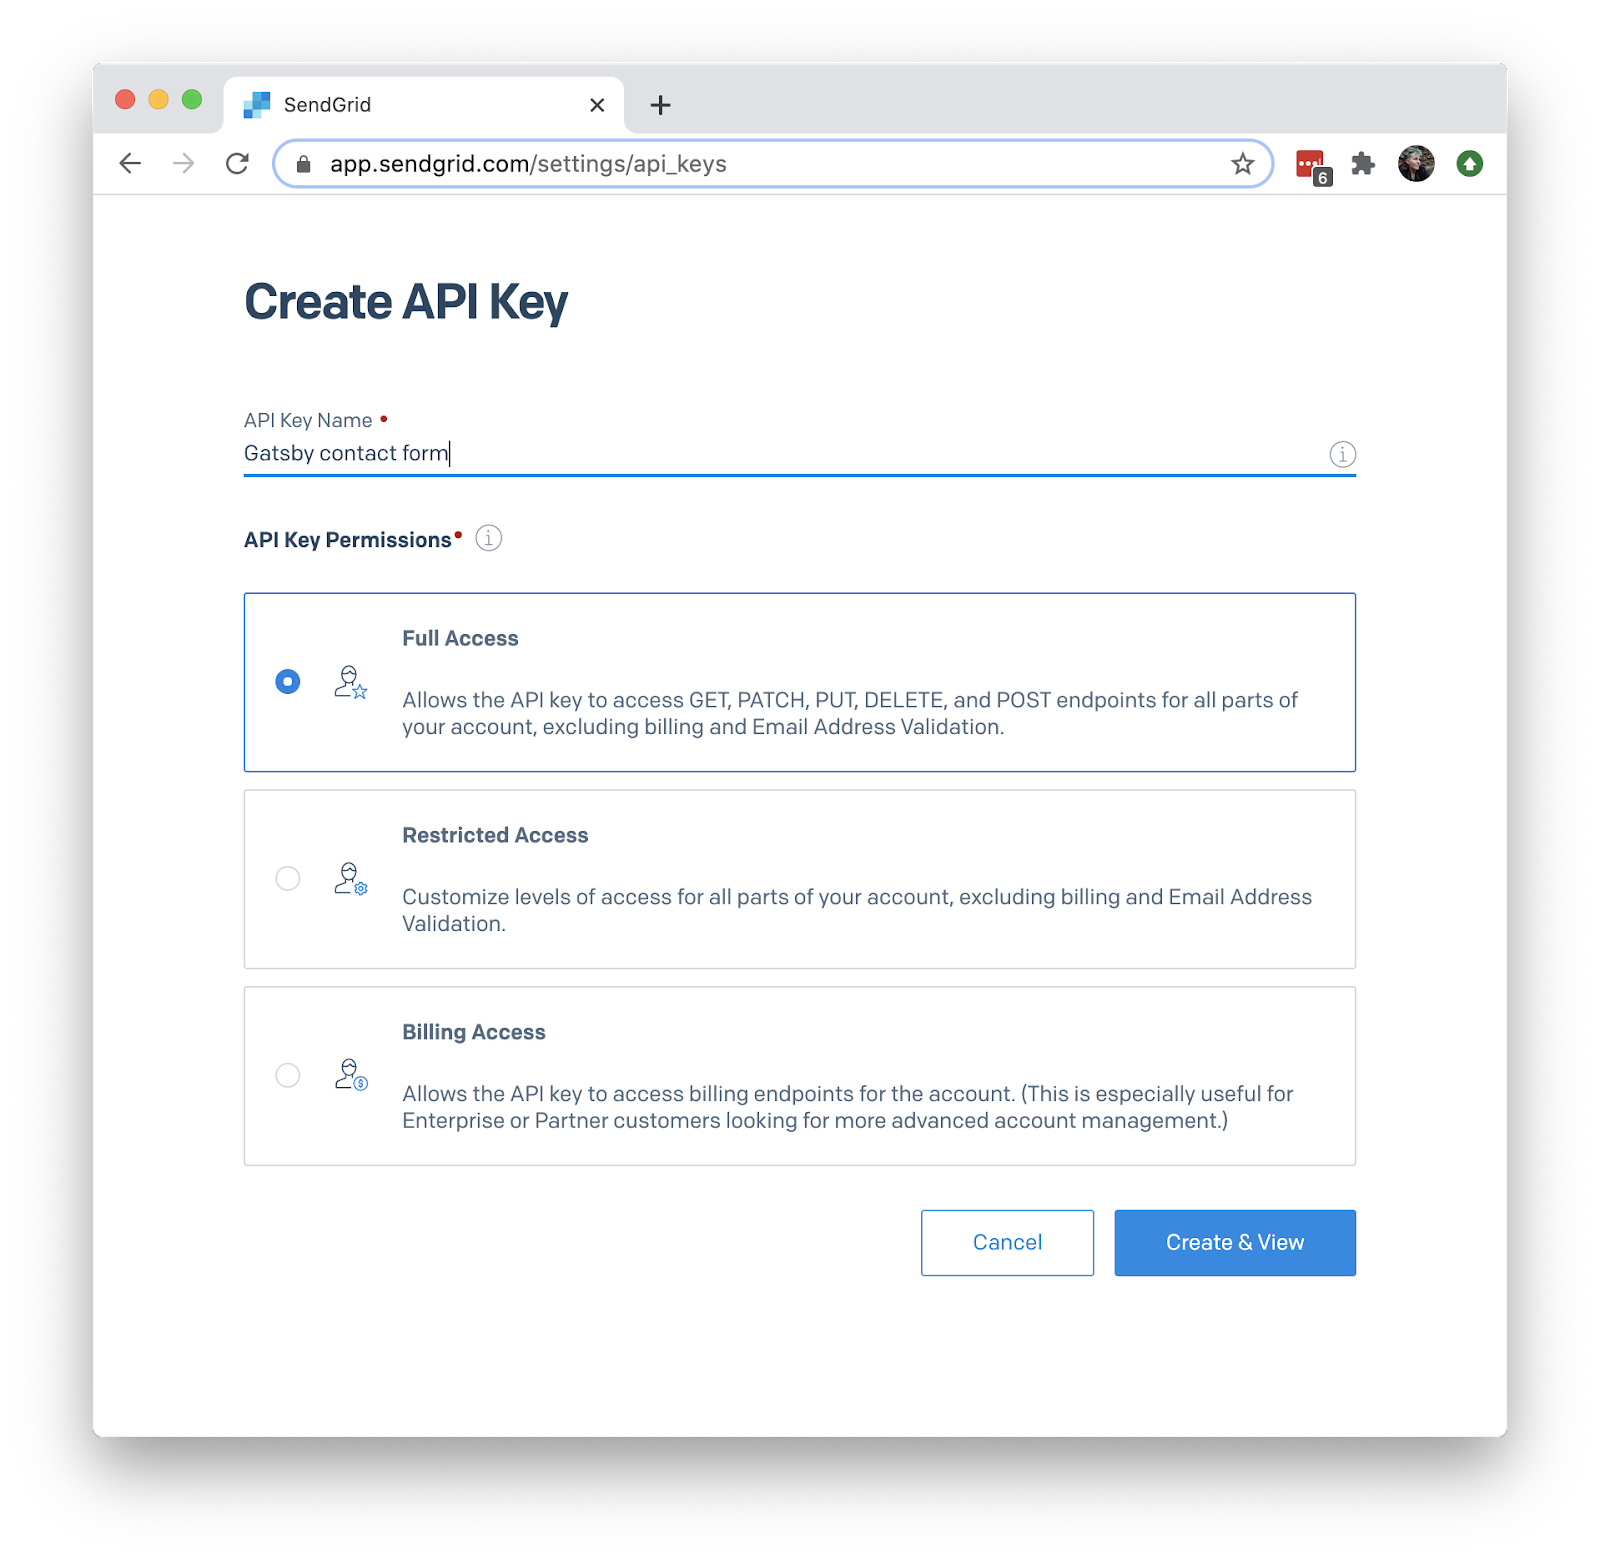 screenshot of the SendGrid page for creating an API key. The key name is "Gatsby contact form" and the permissions are "Full Access."